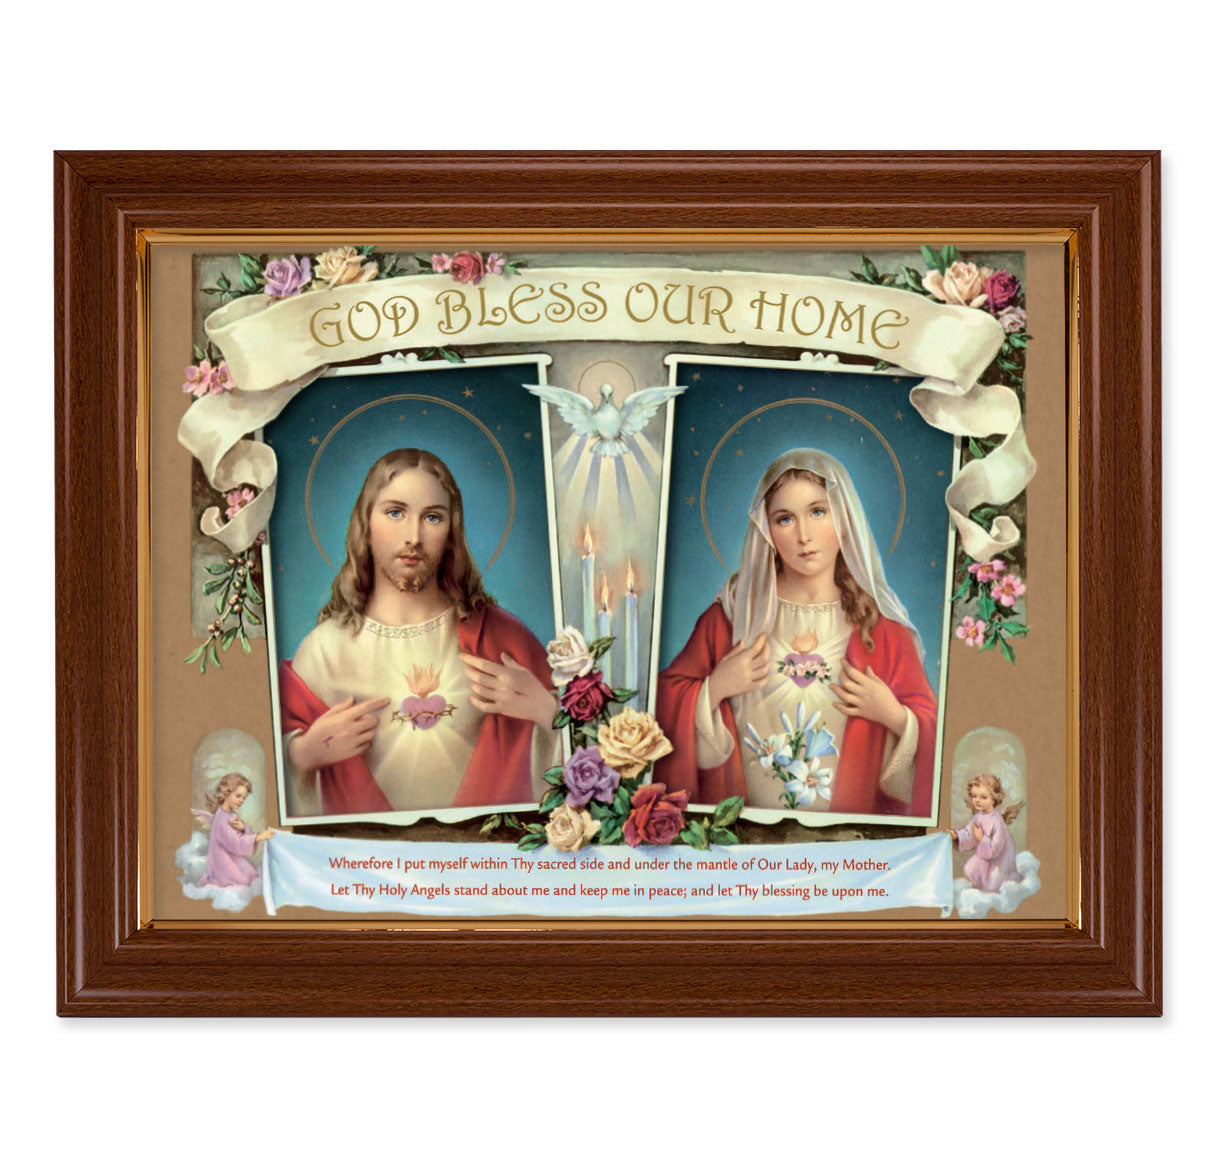 House Blessing - SHJ & IMH Picture Framed Wall Art Decor Extra Large, Traditional Dark Walnut Finished Frame with Thin Gold Lip